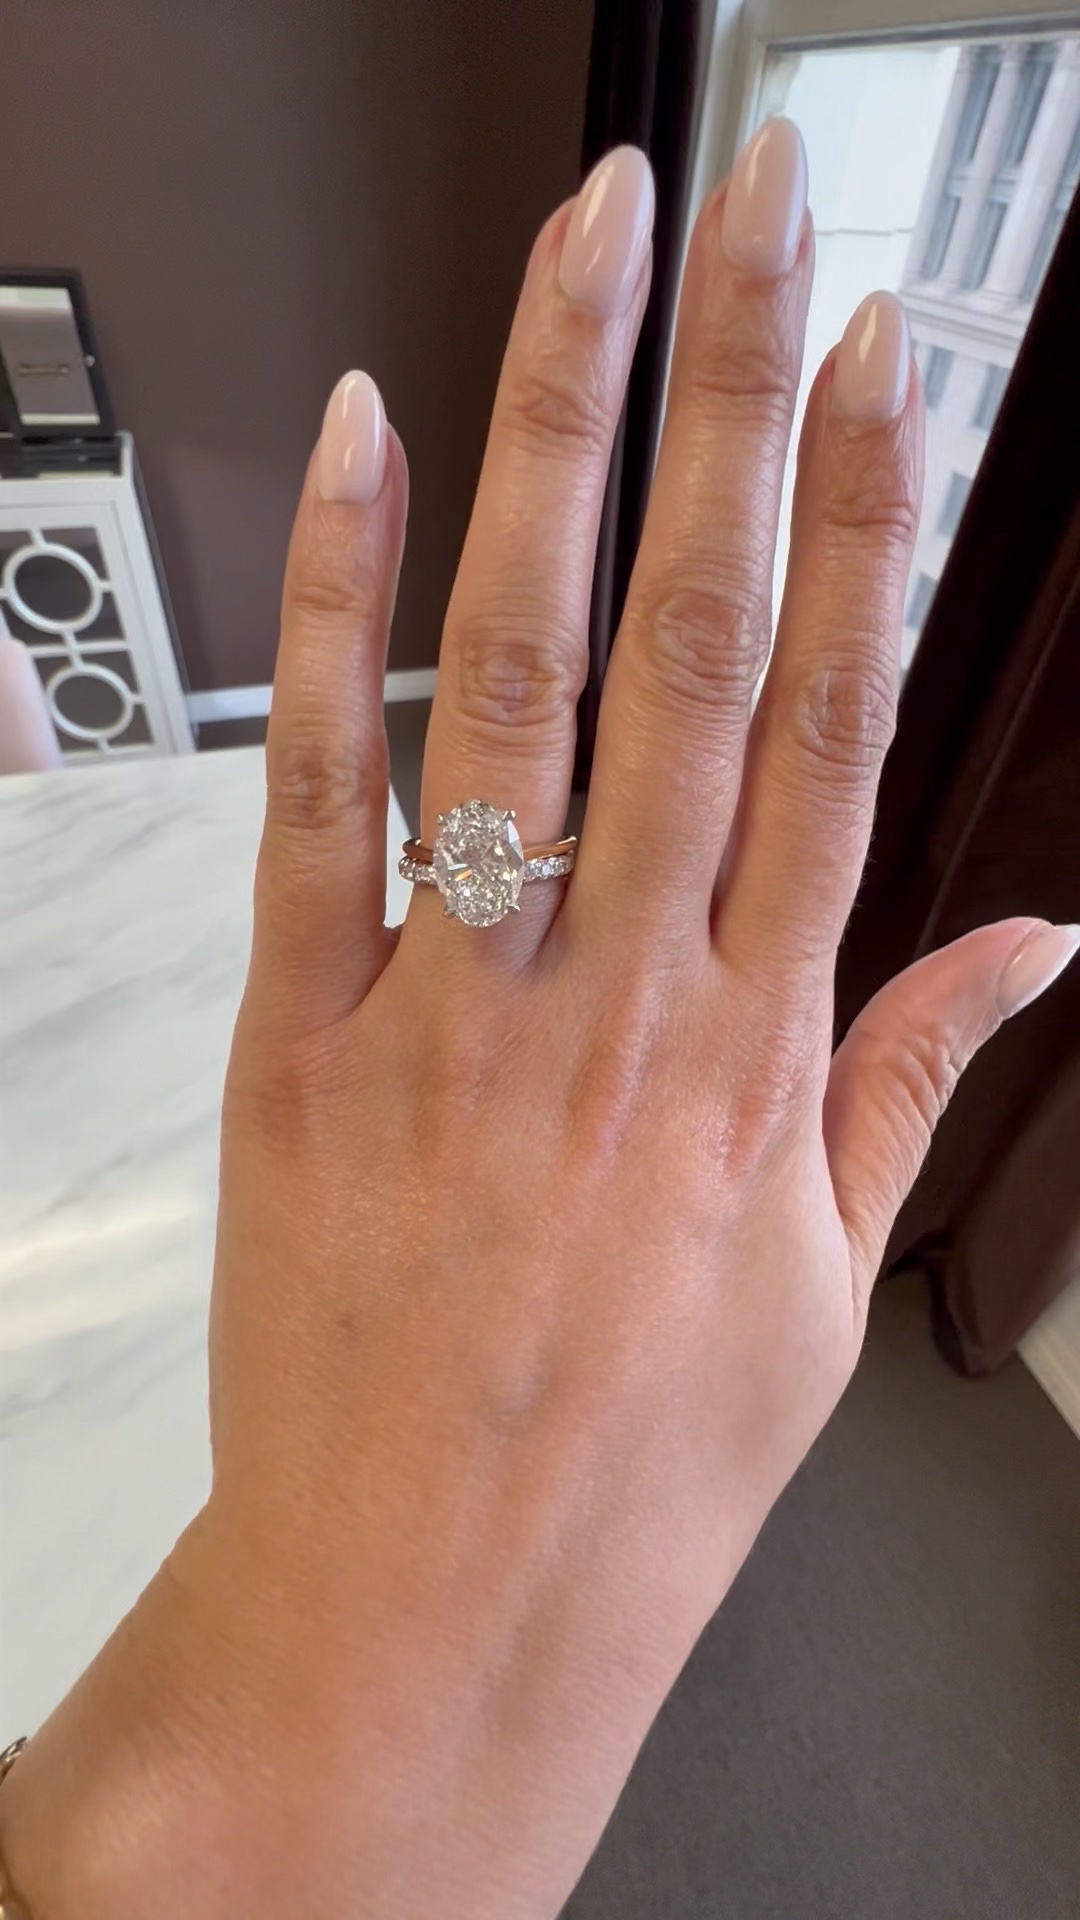 10 Reasons to Choose a Rose Gold Engagement or Wedding Ring